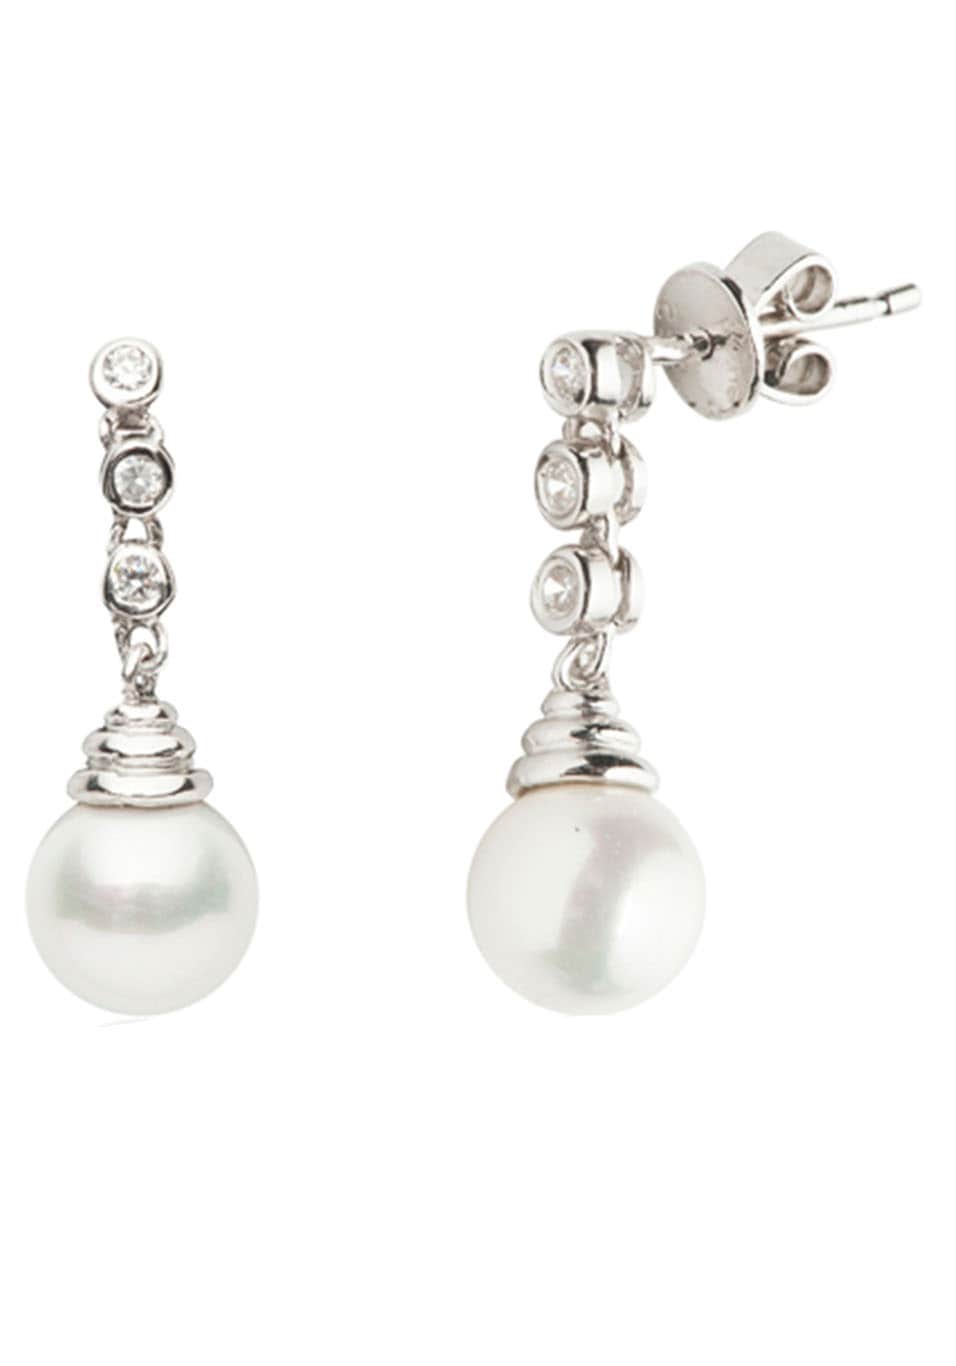 Ohrstecker Paar (synth.) online »CLASSY Zirkonia JEWELLERY PEARL, mit mit - UNIKE Perle UK.BR.1204.0001«, (synth.)